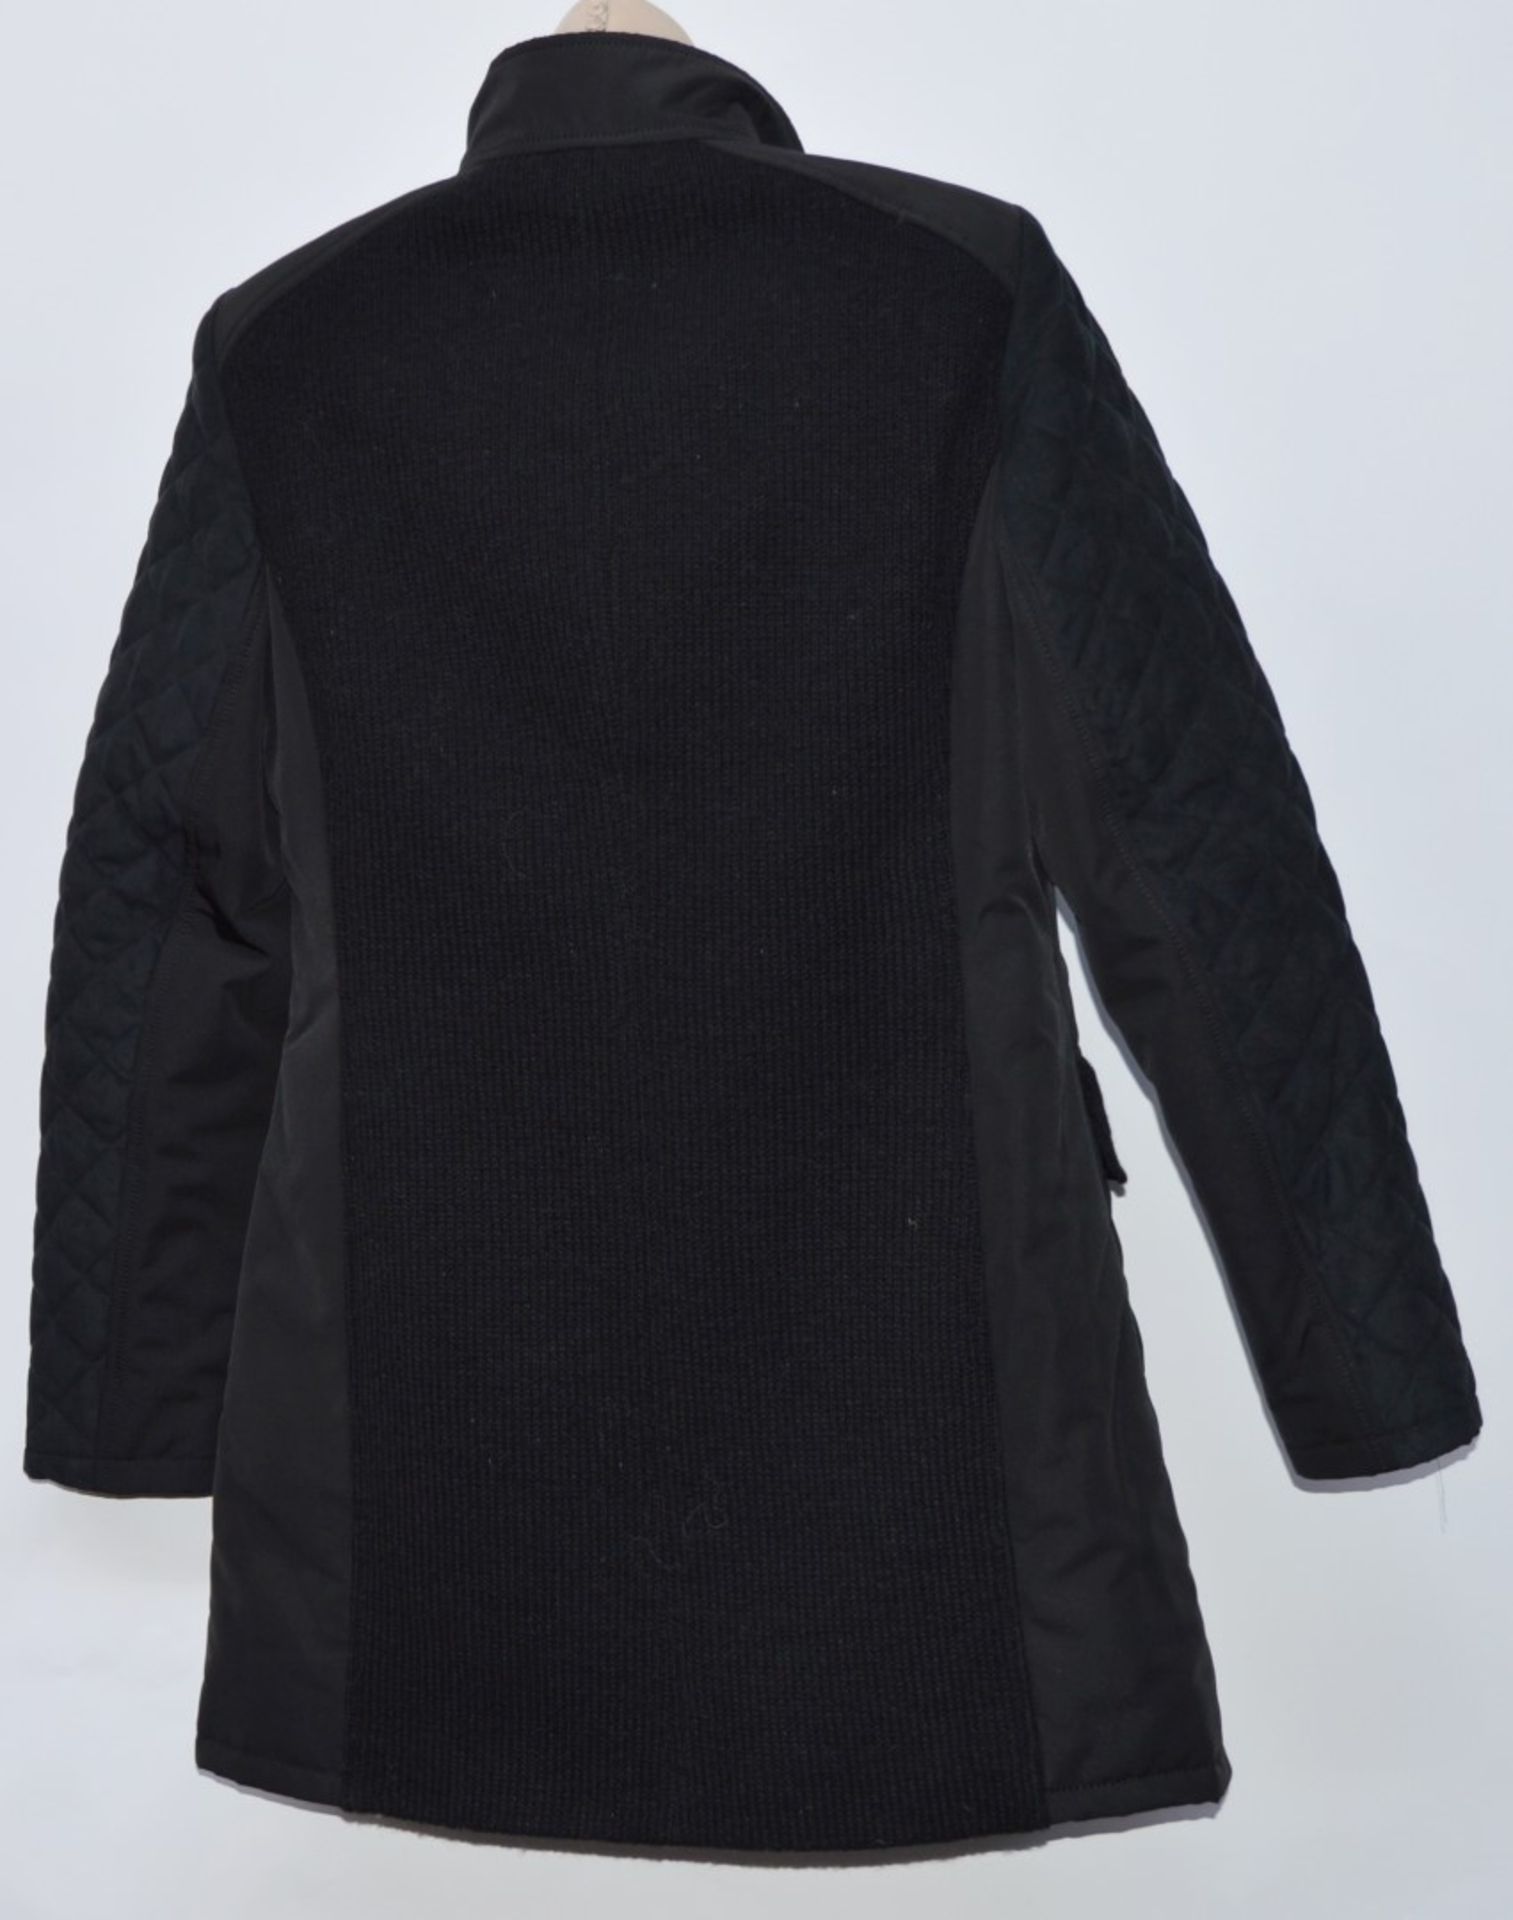 1 x Steilmann KSTN By Kirsten Womens Coat -  Knit Fabric Coat With Functional Pockets and Inner - Image 2 of 8